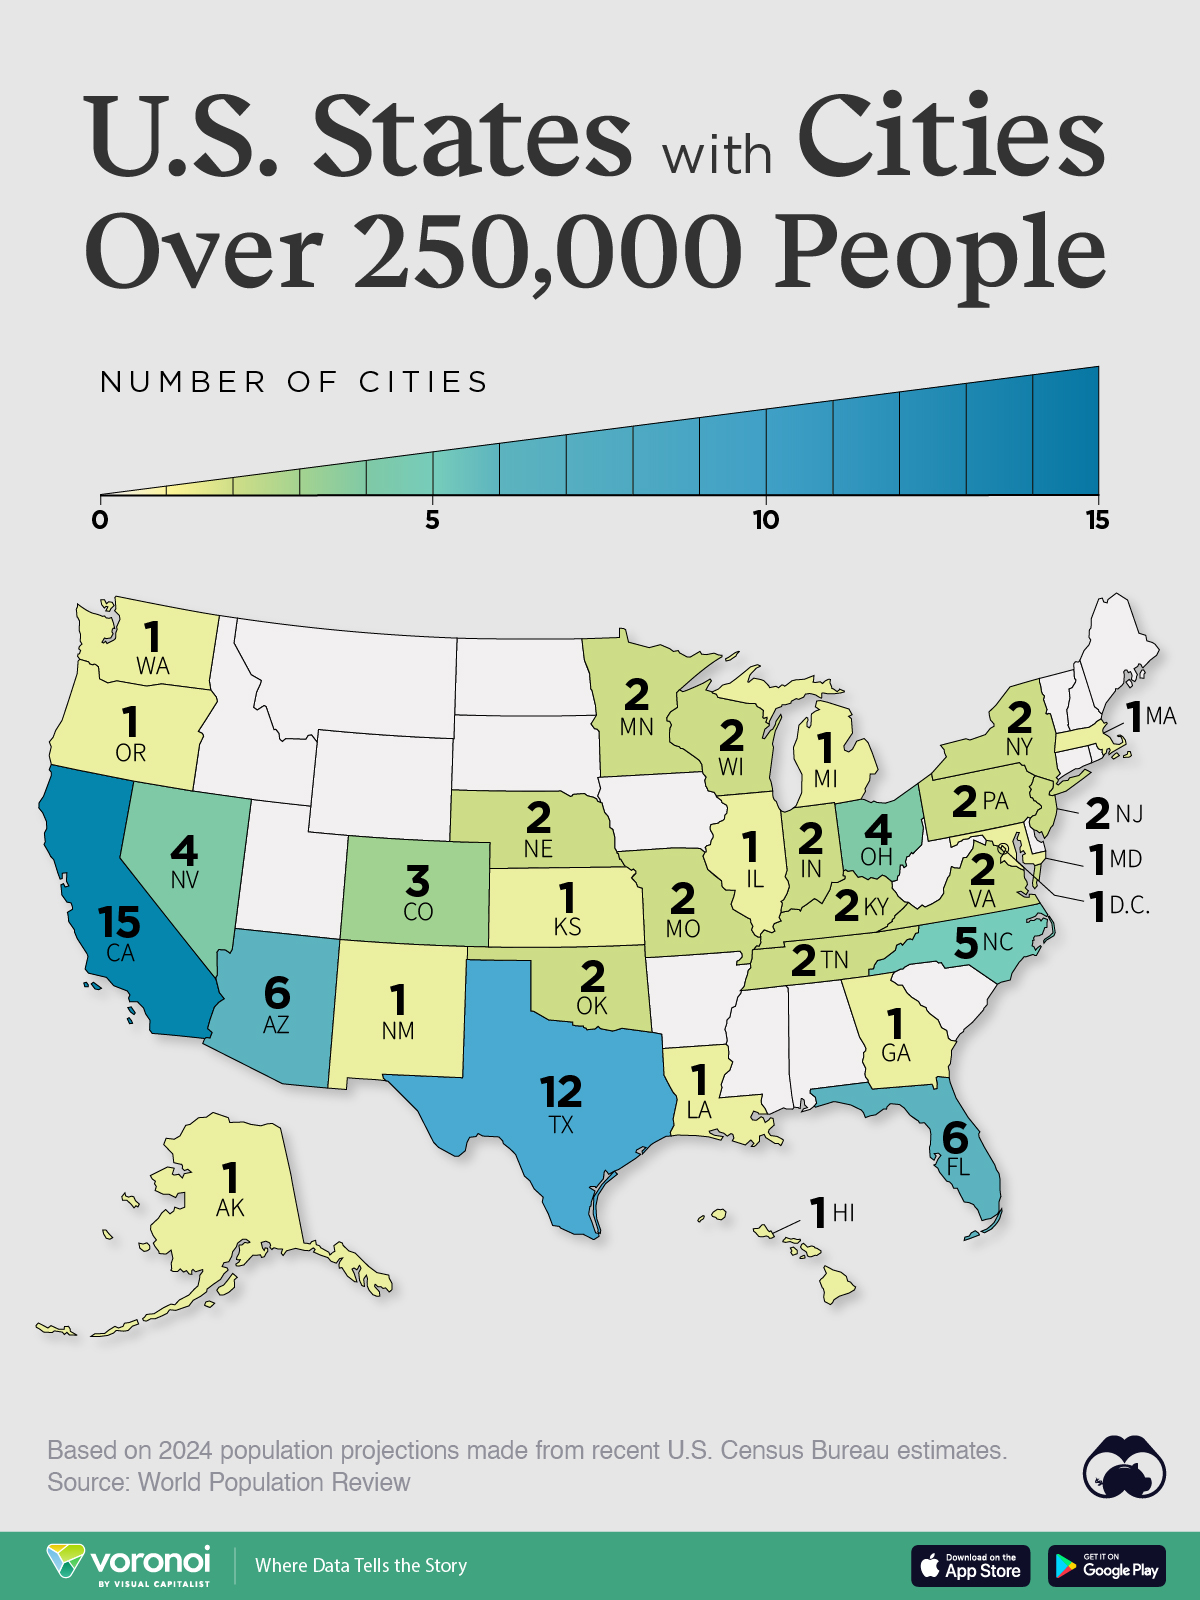 A map showing the number of cities with 250,000+ residents in each U.S. state.